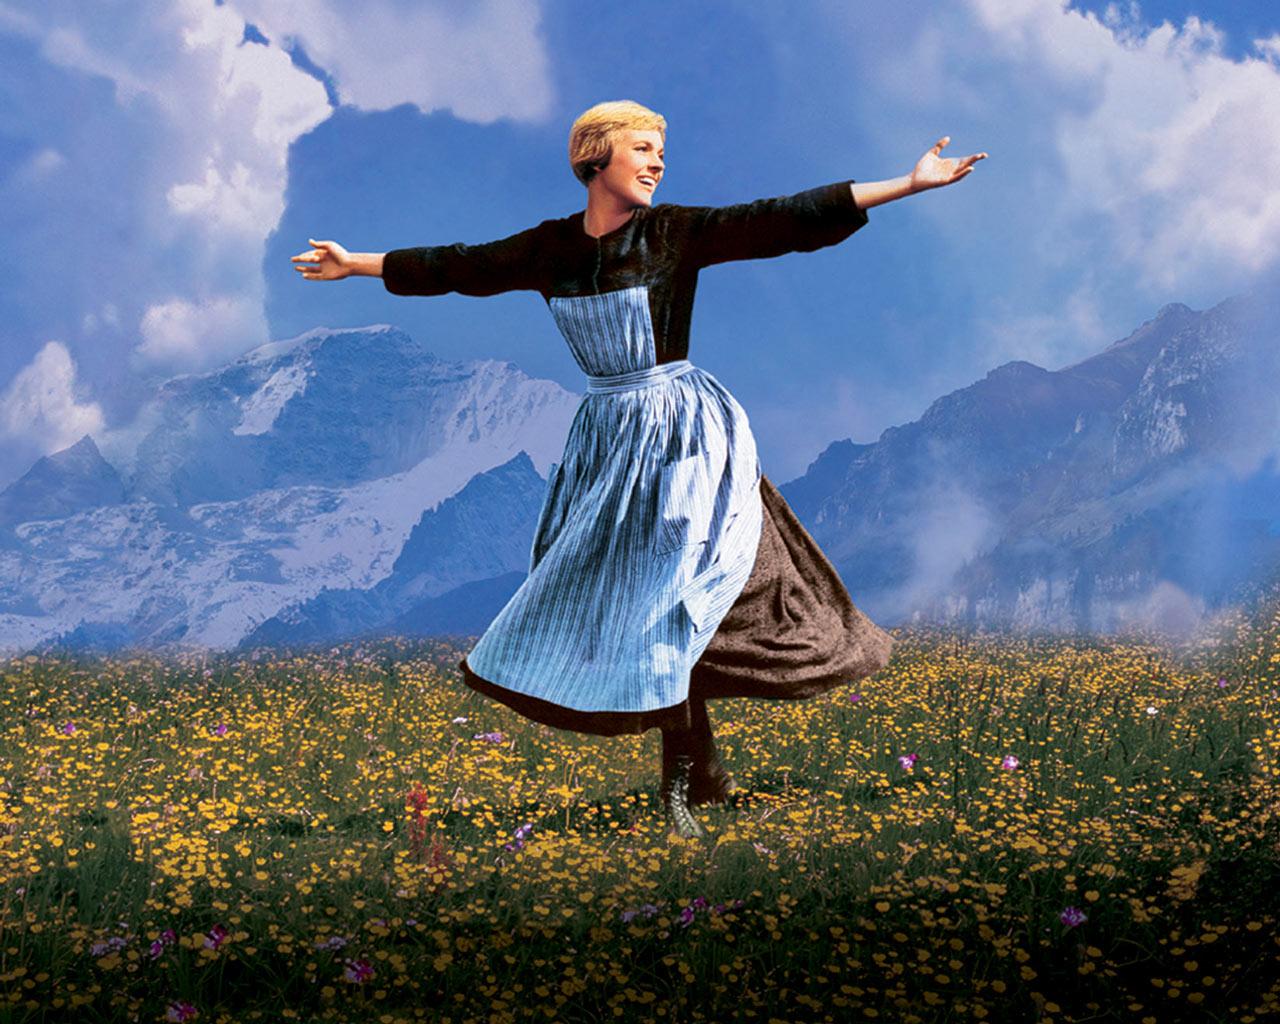 The Sound Of Music Wallpaper #2 1280 x 1024 